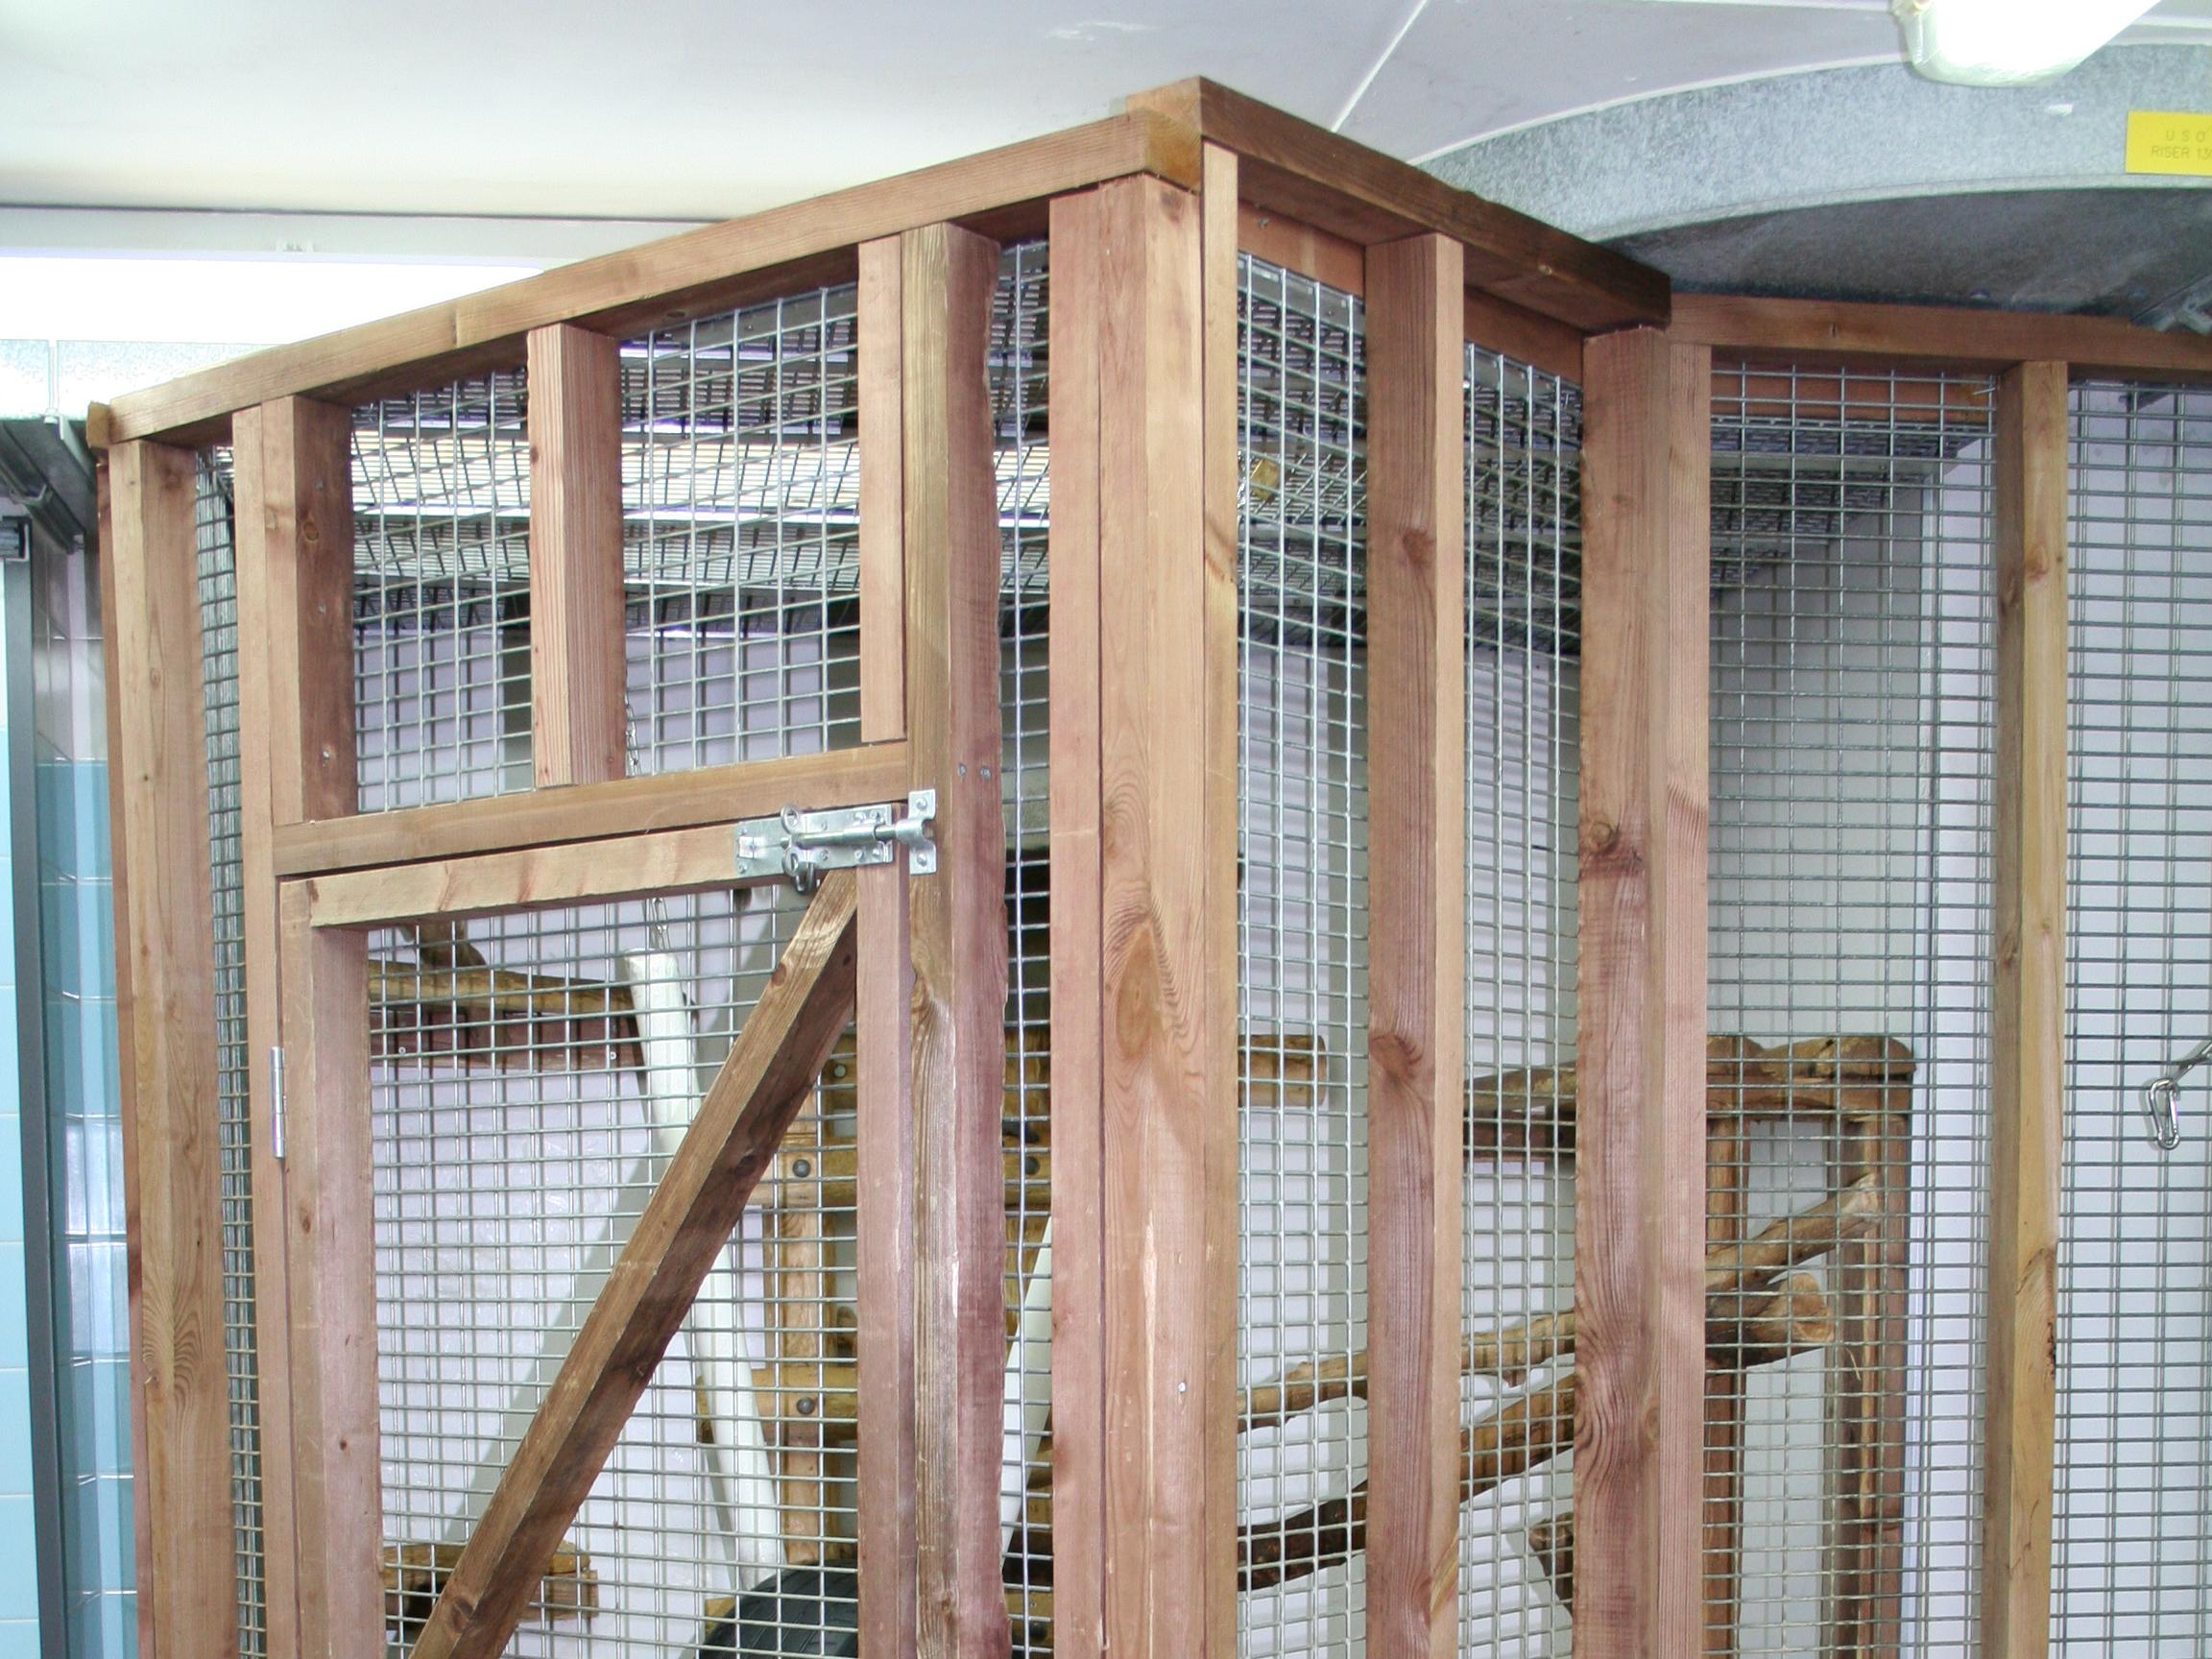 Example of an exercise play area to compliment conventional caging structures. There is sawdust on the floor, planks of wood for te macaques to perch and climb, and rubber tyres for macaques to sit and swing in.